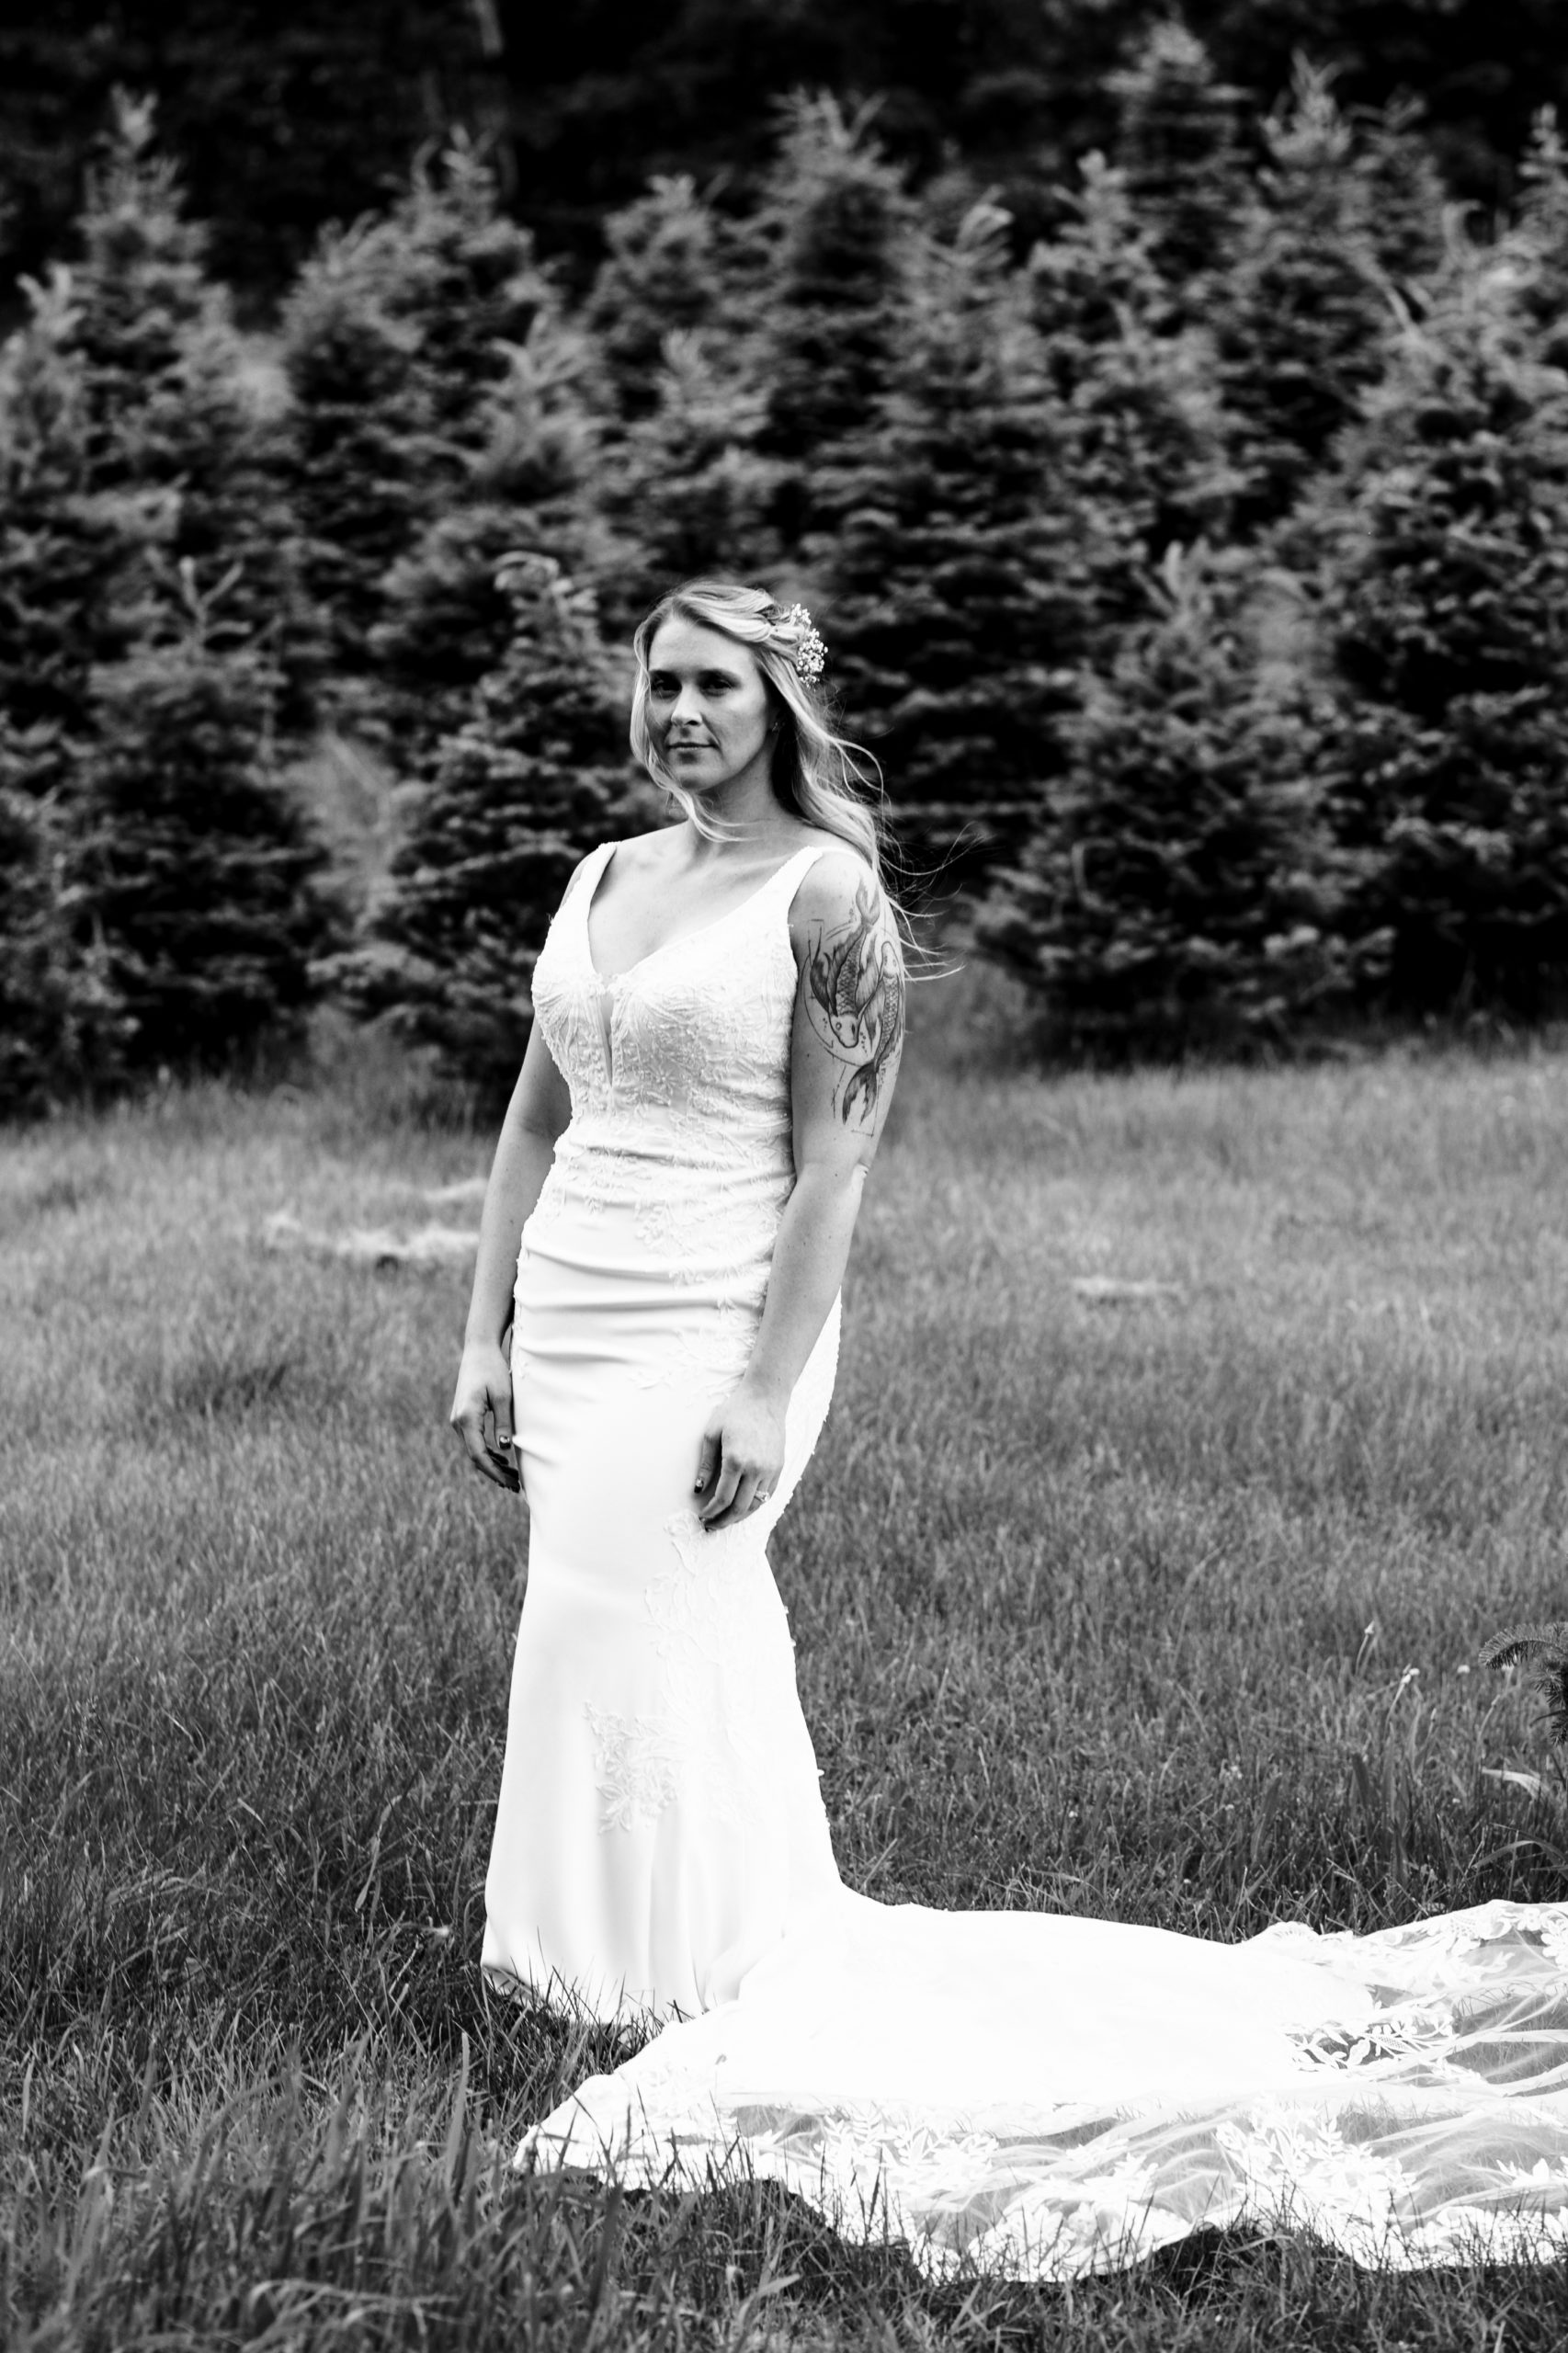 The bride among the green foliage of summer in maine